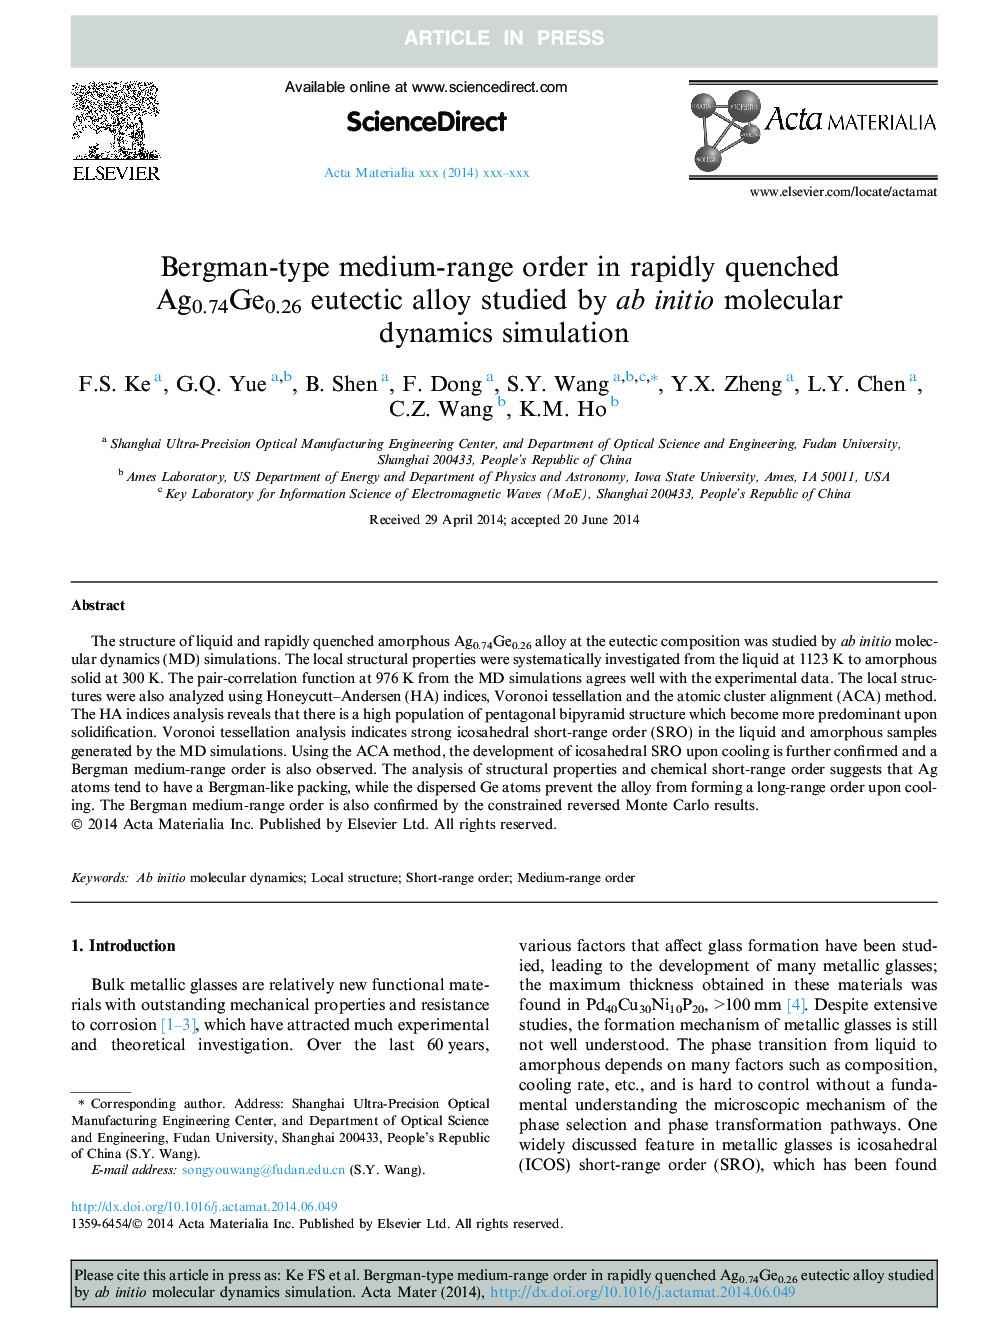 Bergman-type medium-range order in rapidly quenched Ag0.74Ge0.26 eutectic alloy studied by ab initio molecular dynamics simulation